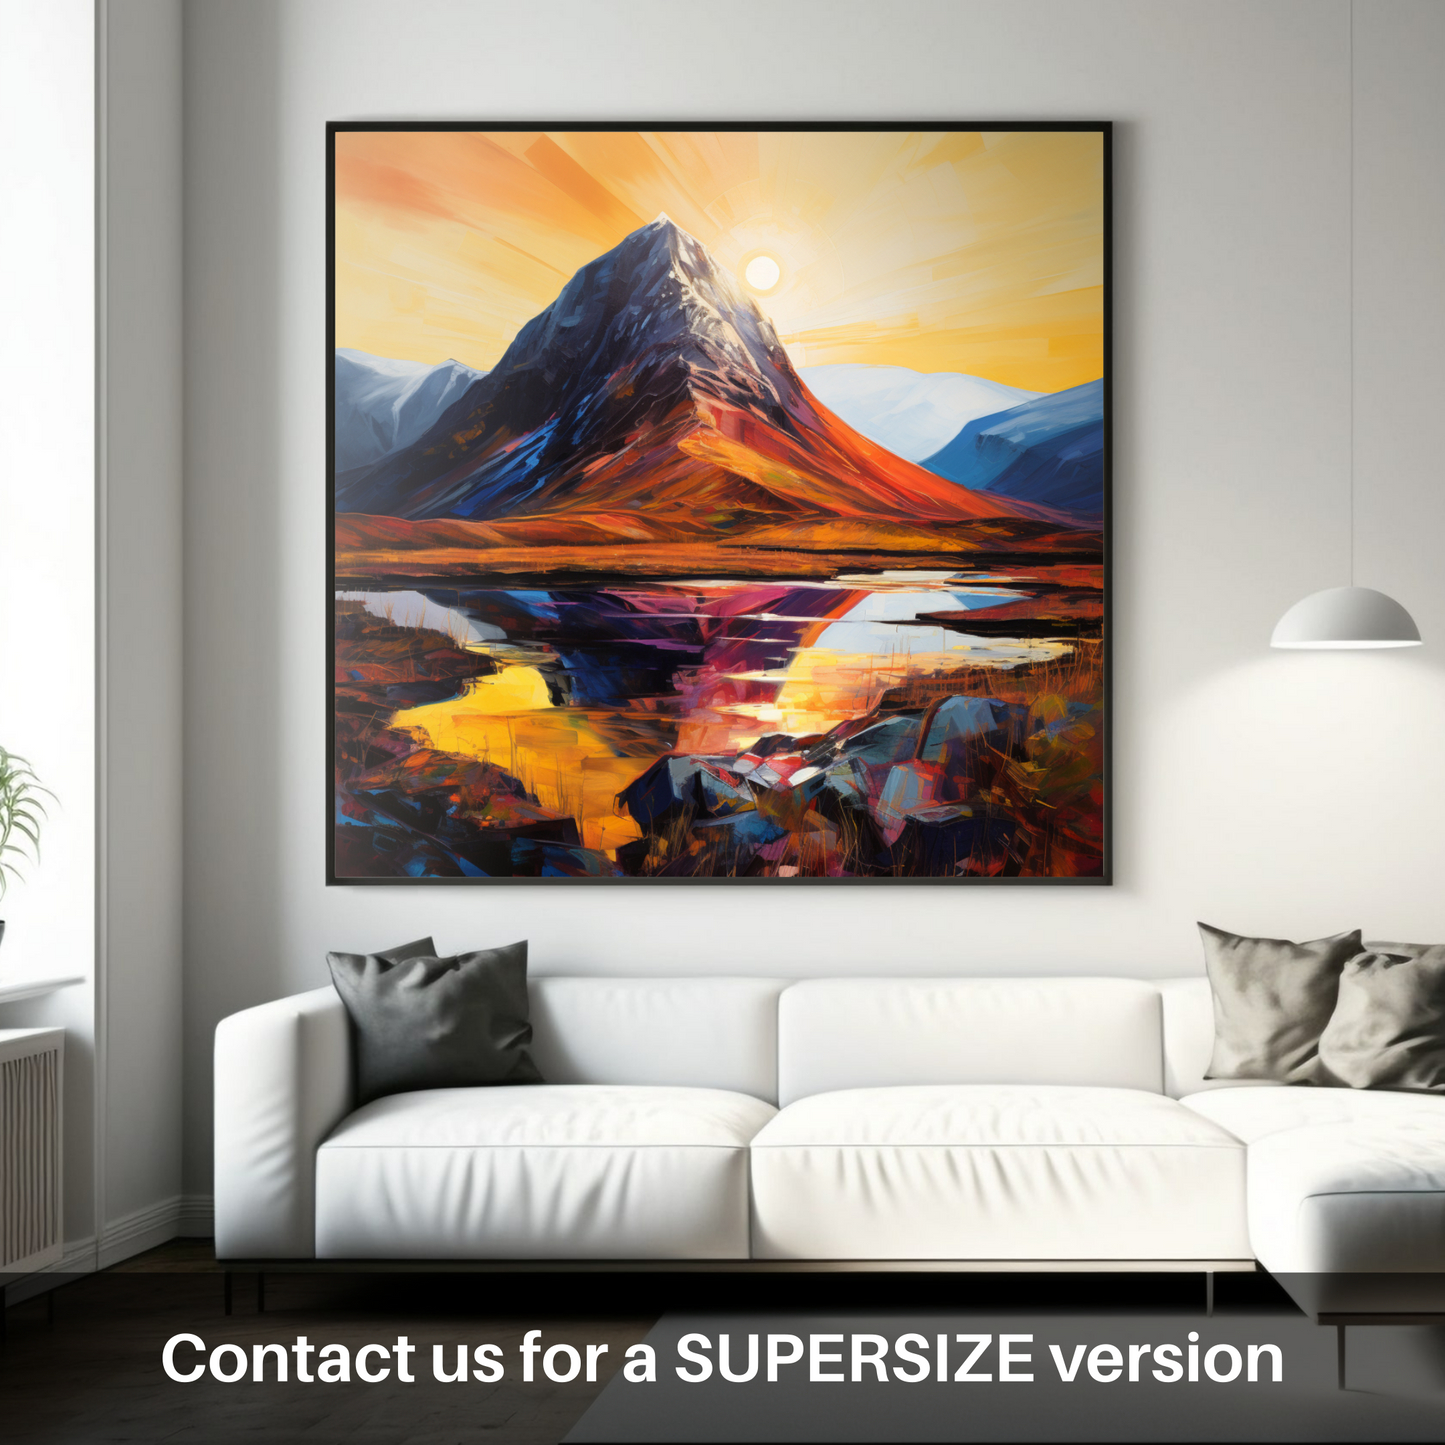 Painting and Art Print of Buachaille sunrise in Glencoe. Buachaille Sunrise: An Expressionist Ode to Glencoe's Majesty.